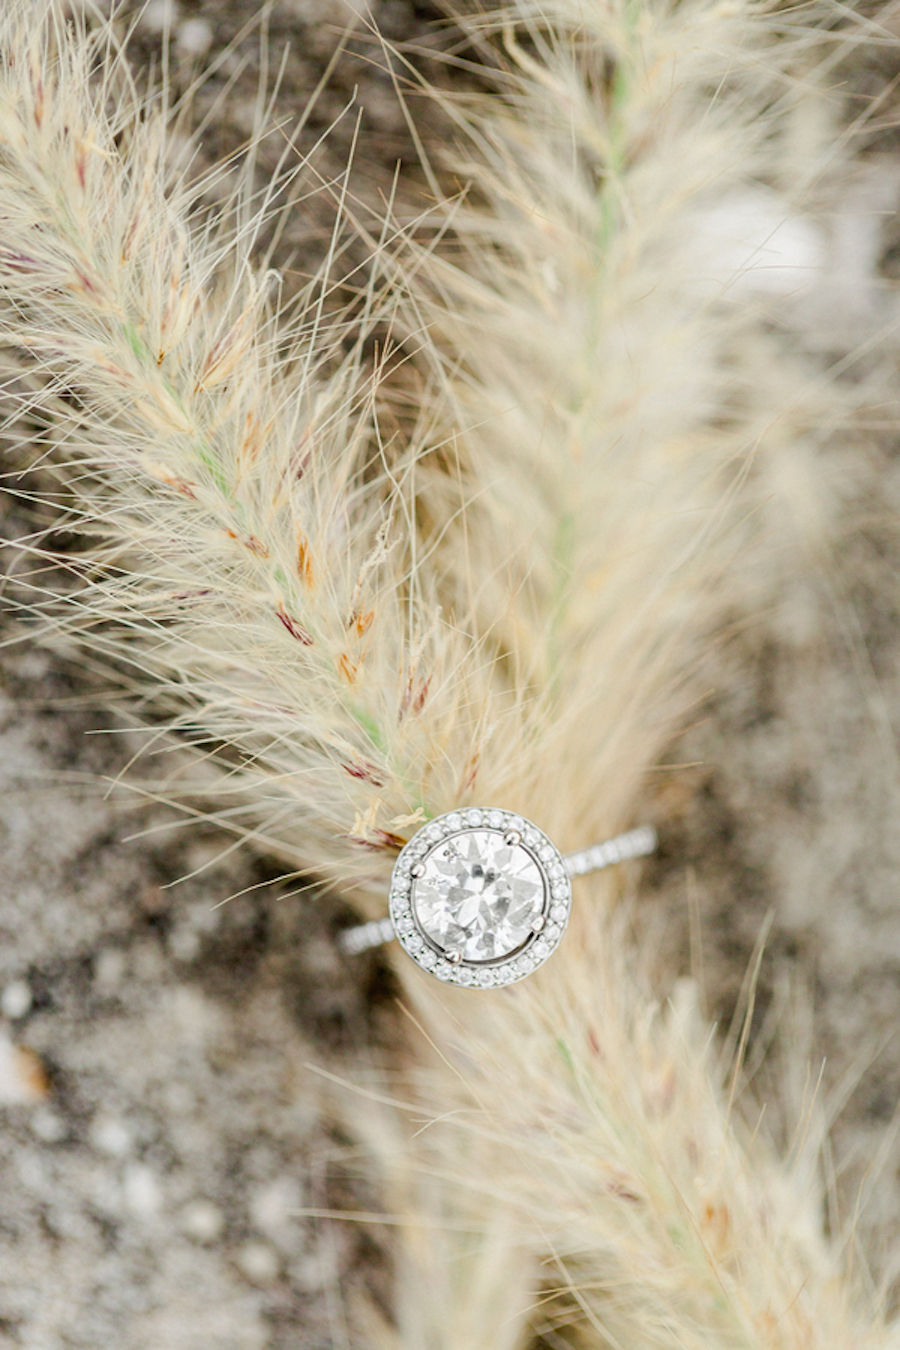 Diamond Engagement Ring Photo with Hay Straw | St. Petersburg Wedding Photographer Ailyn La Torre Photography